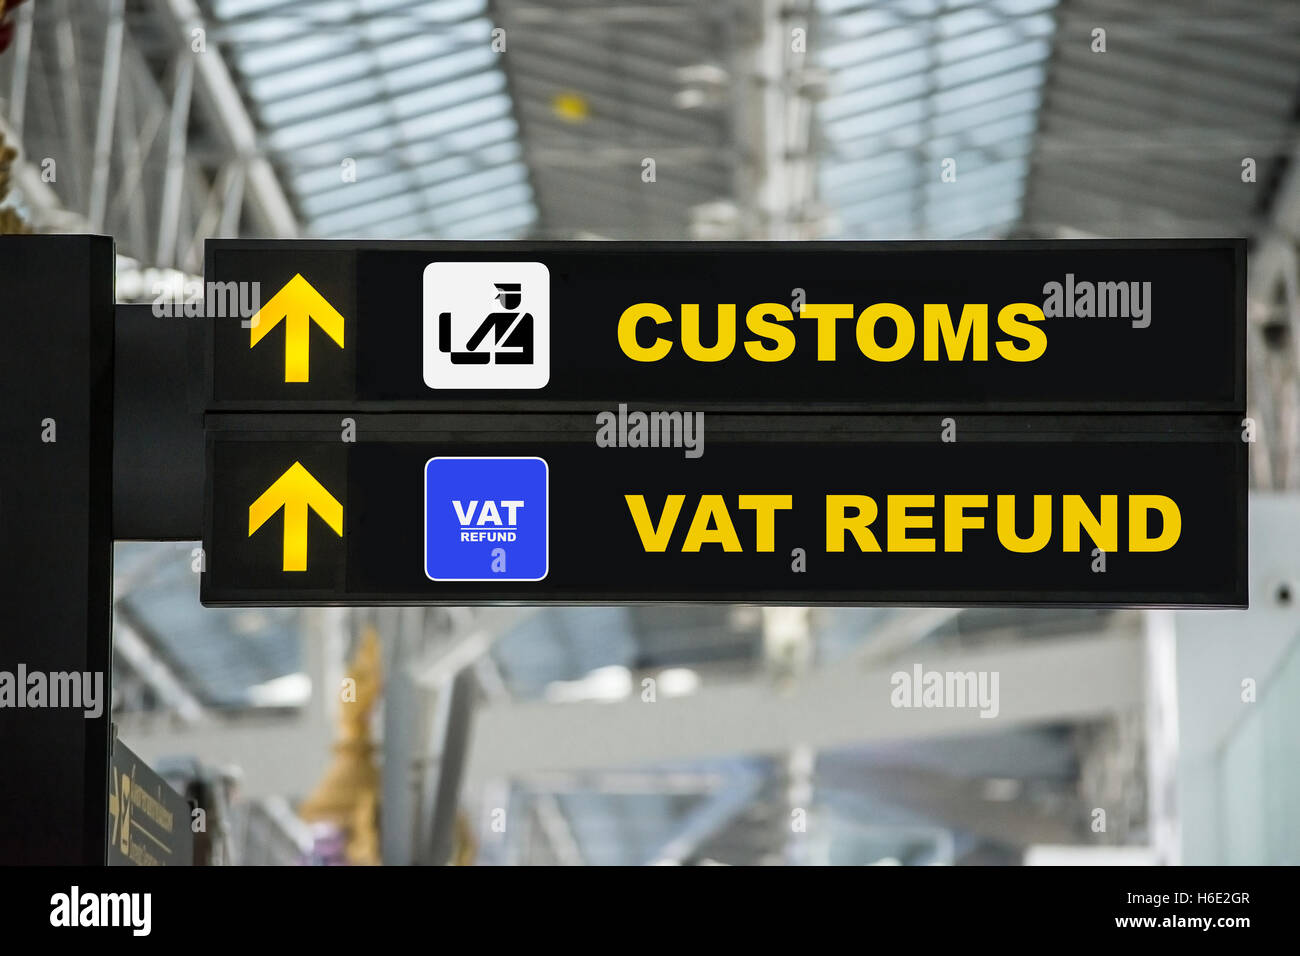 Airport Tax Refund And Customs Sign In Terminal At Airport Stock Photo 